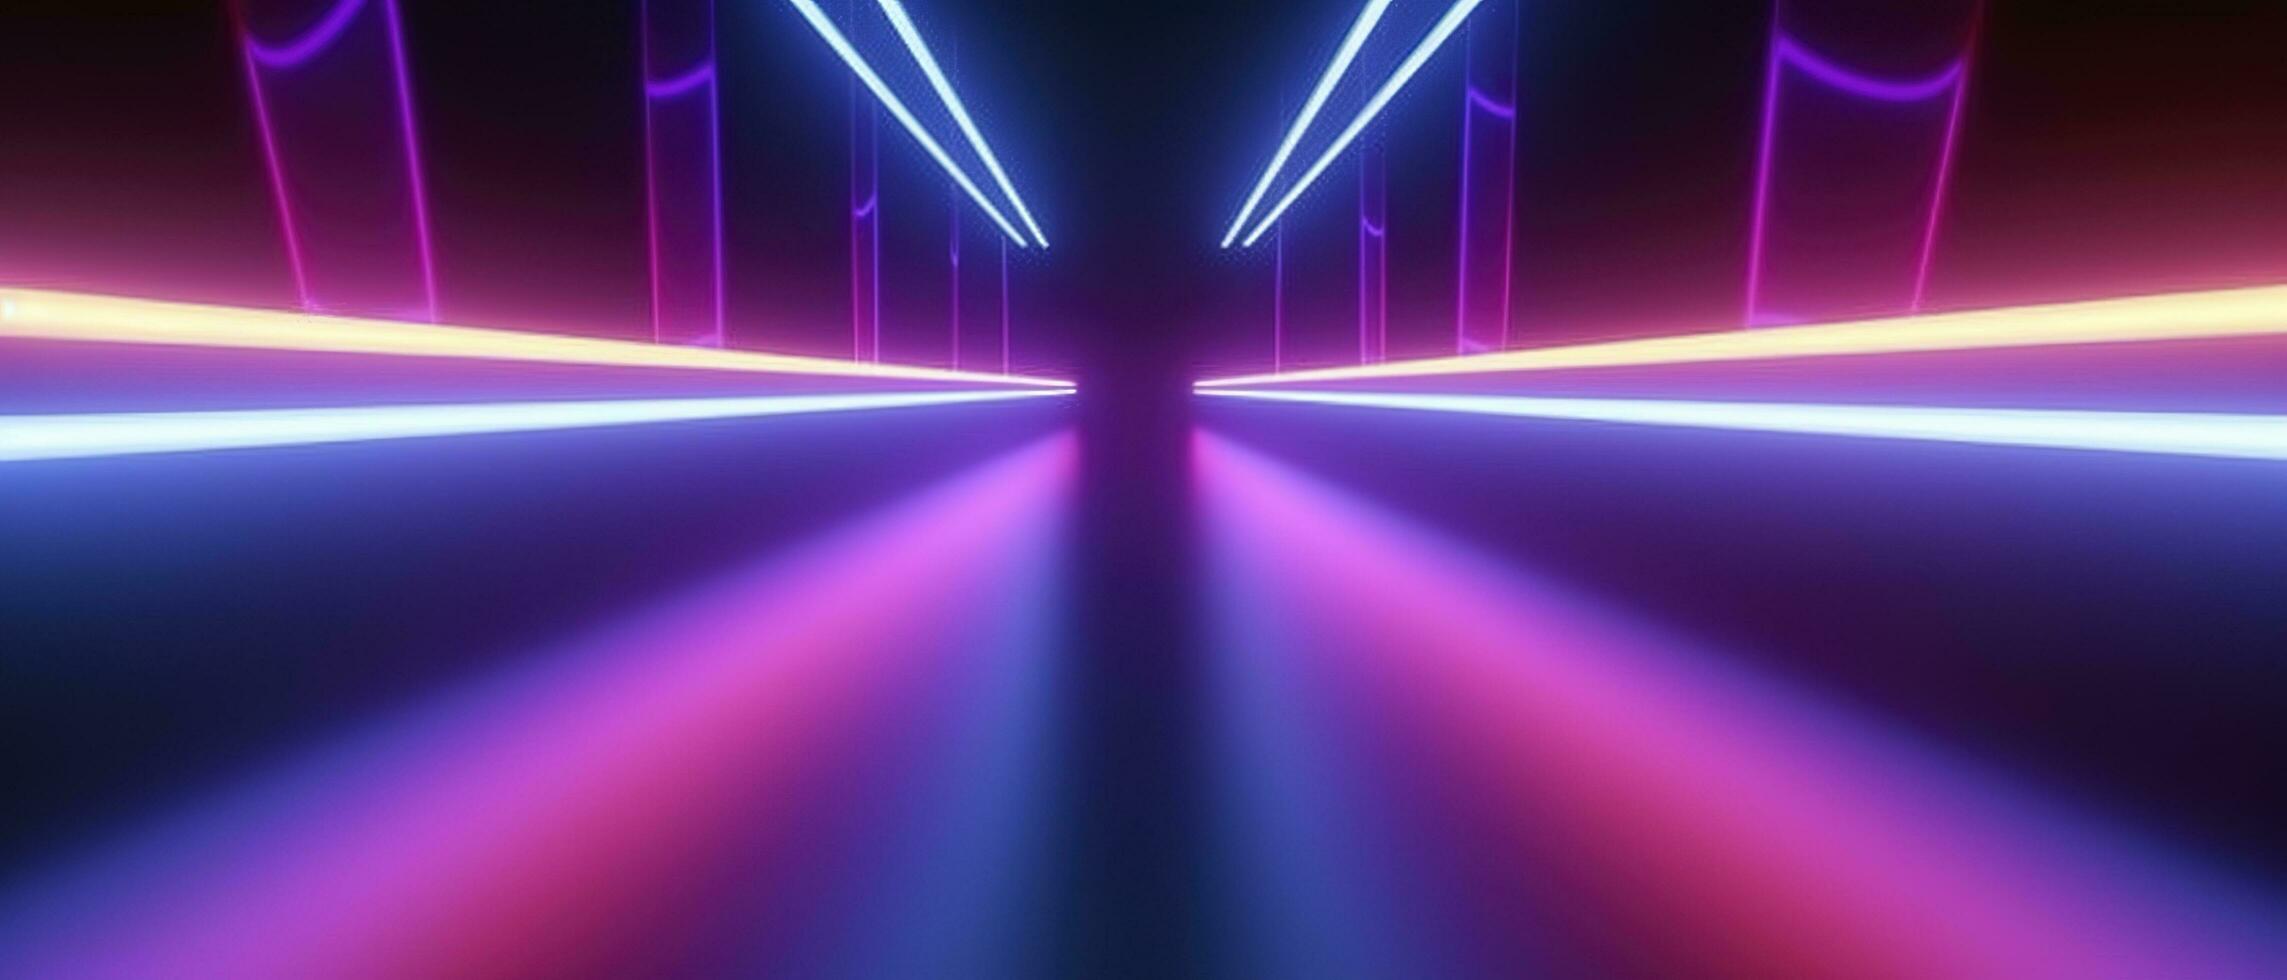 Neon Wallpaper Stock Photos, Images and Backgrounds for Free Download